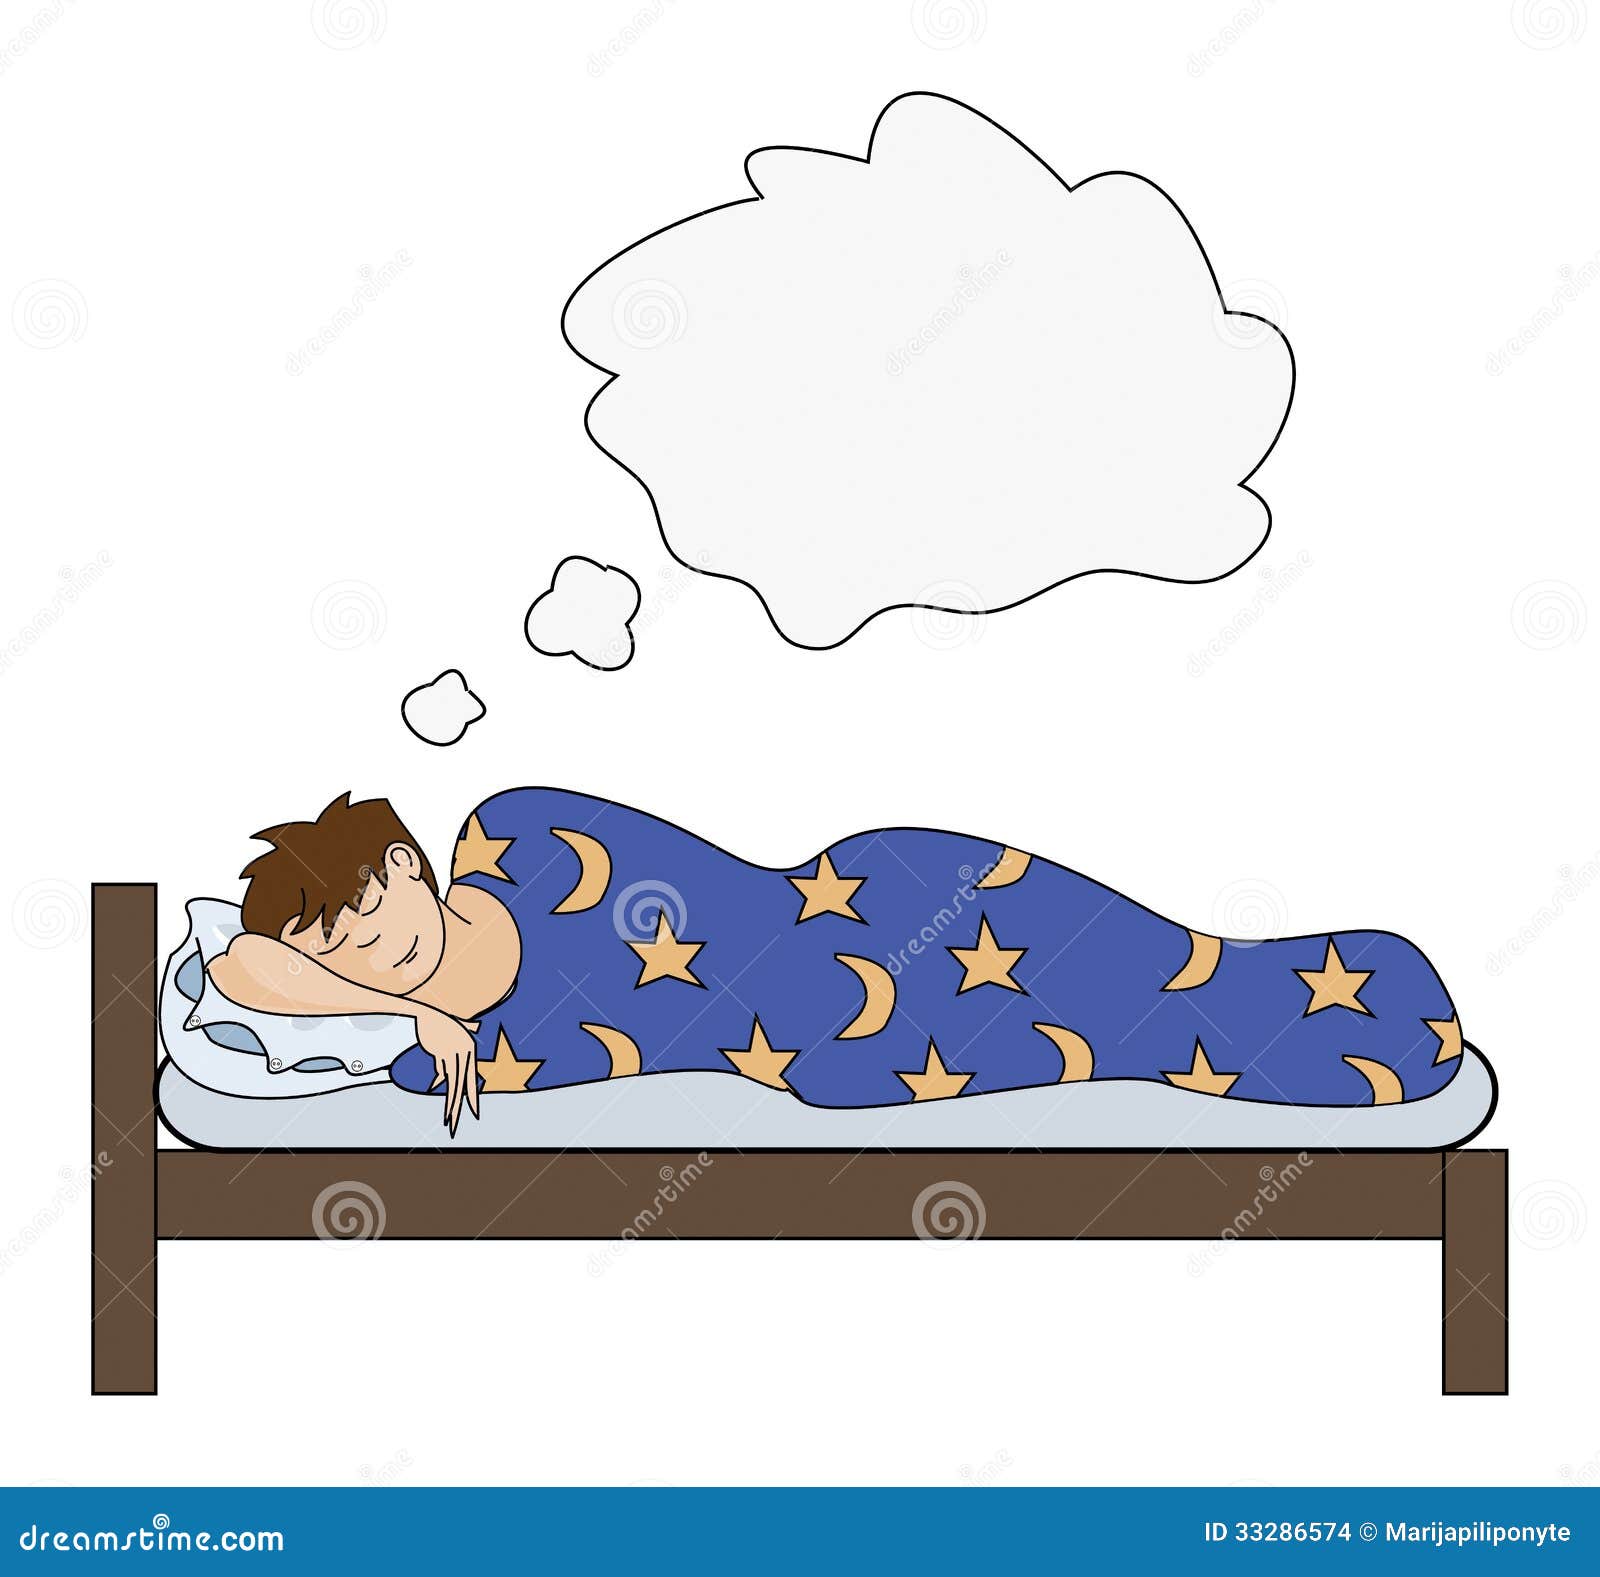 Man Dreaming In Bed Stock Images - Image: 33286574